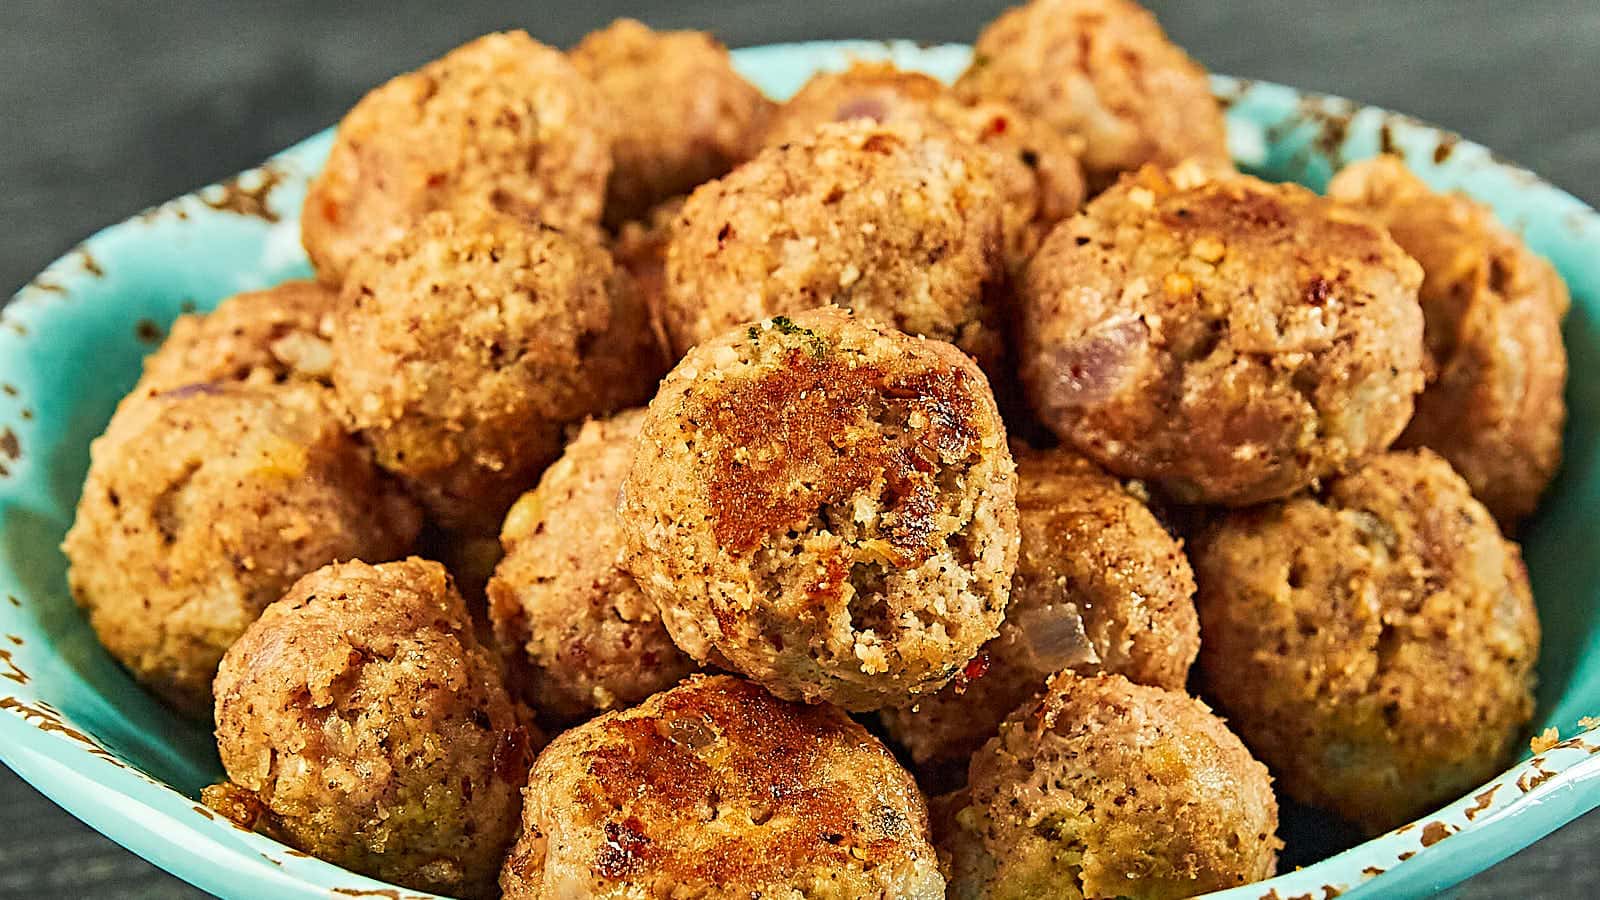 Turkey Meatballs recipe by Cheerful Cook.